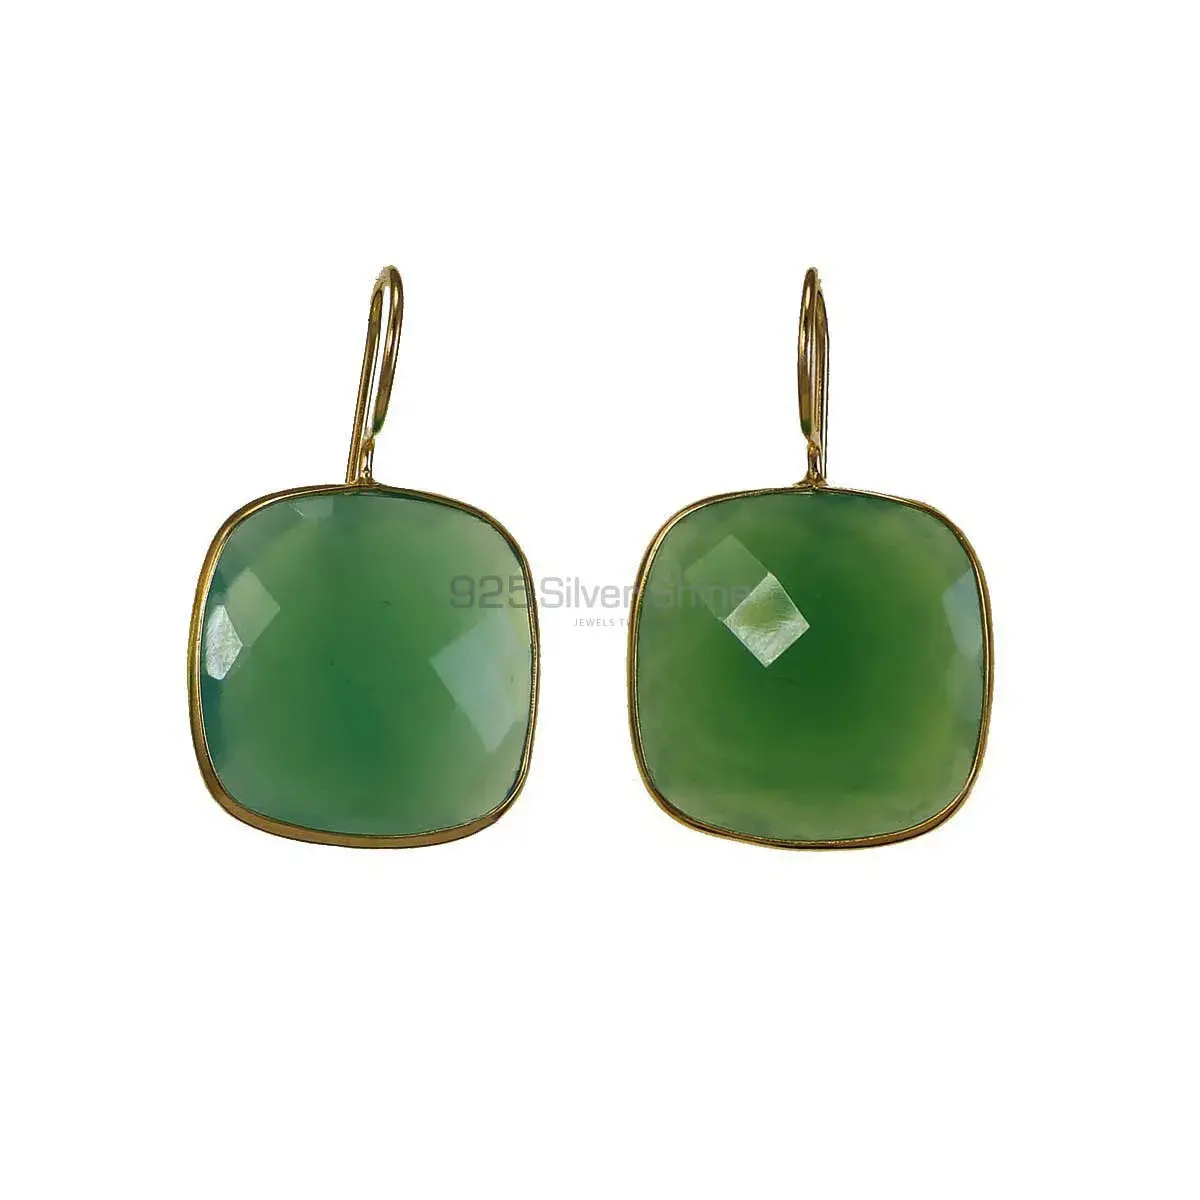 Unique 925 Sterling Silver Handmade Earrings Manufacturer In Chrysoprase Gemstone Jewelry 925SE1973